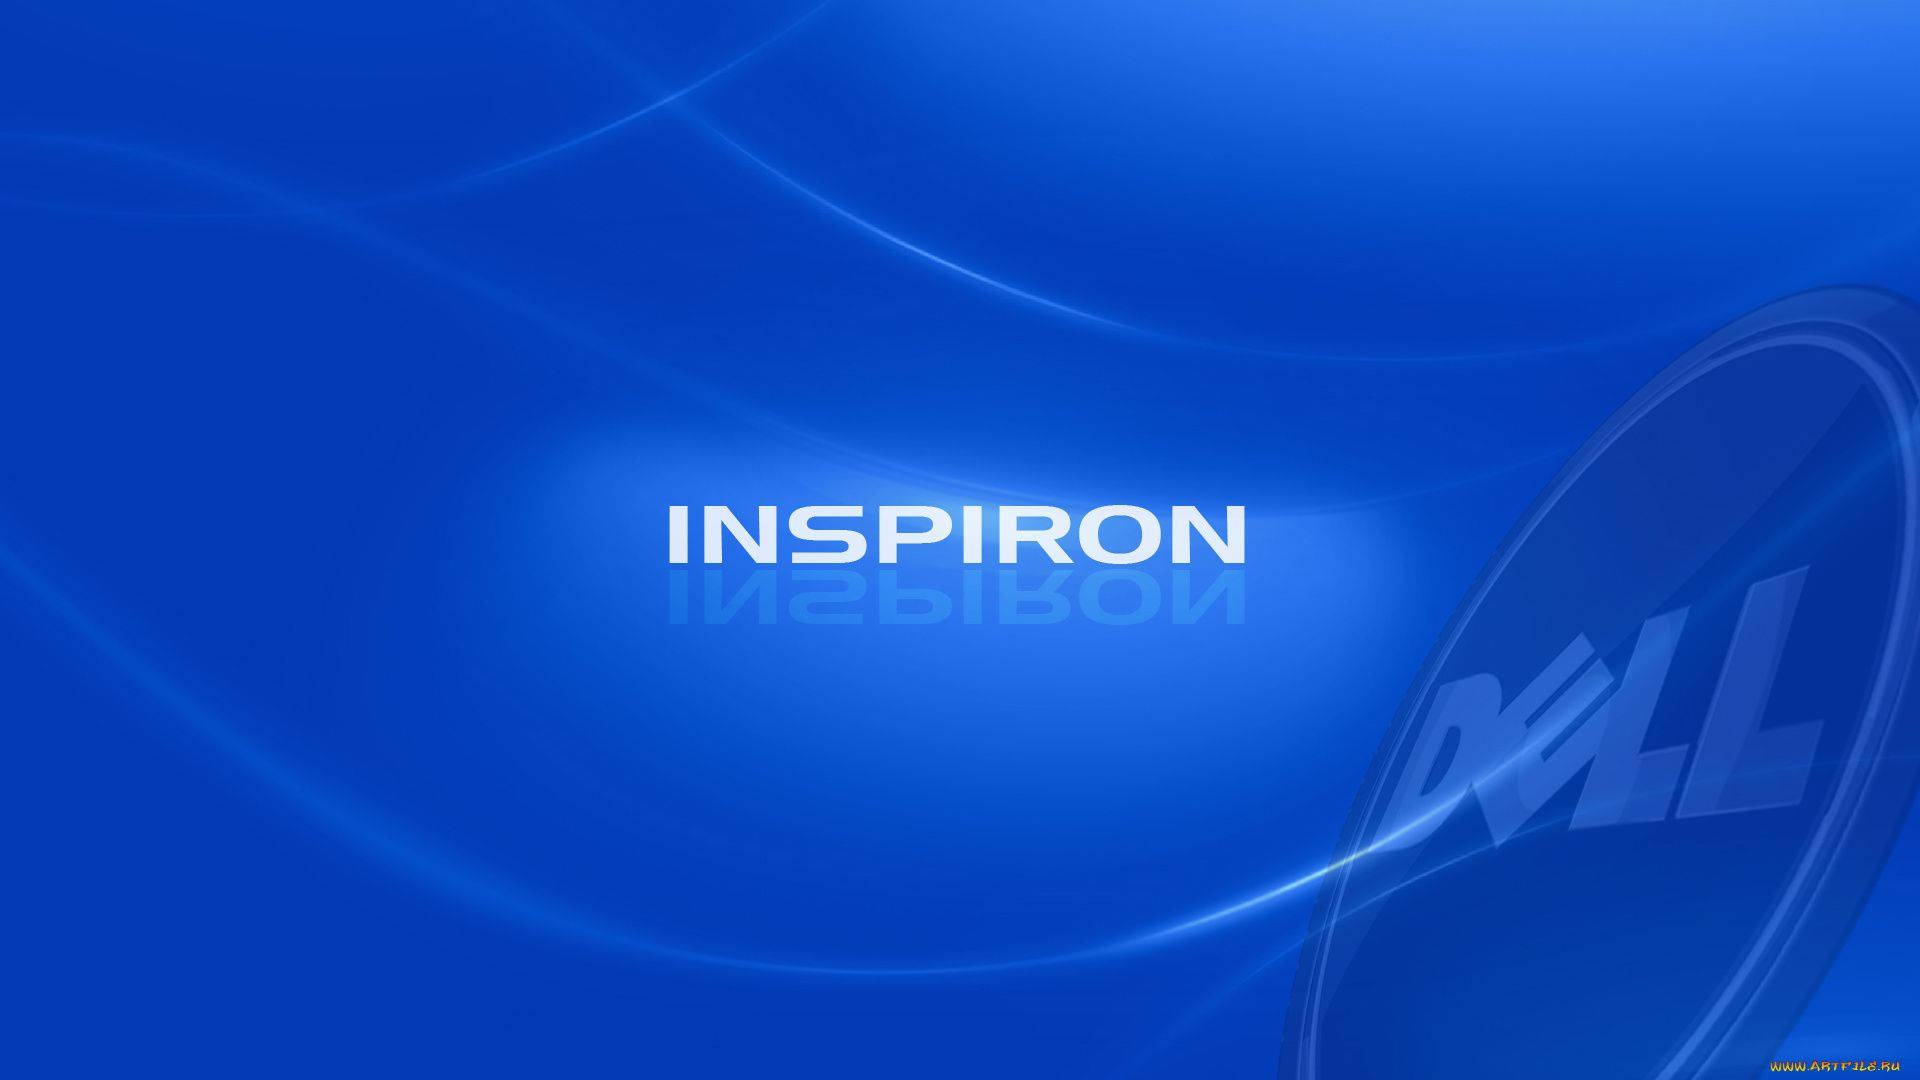 Inspiron And Dell Hd Logo Background